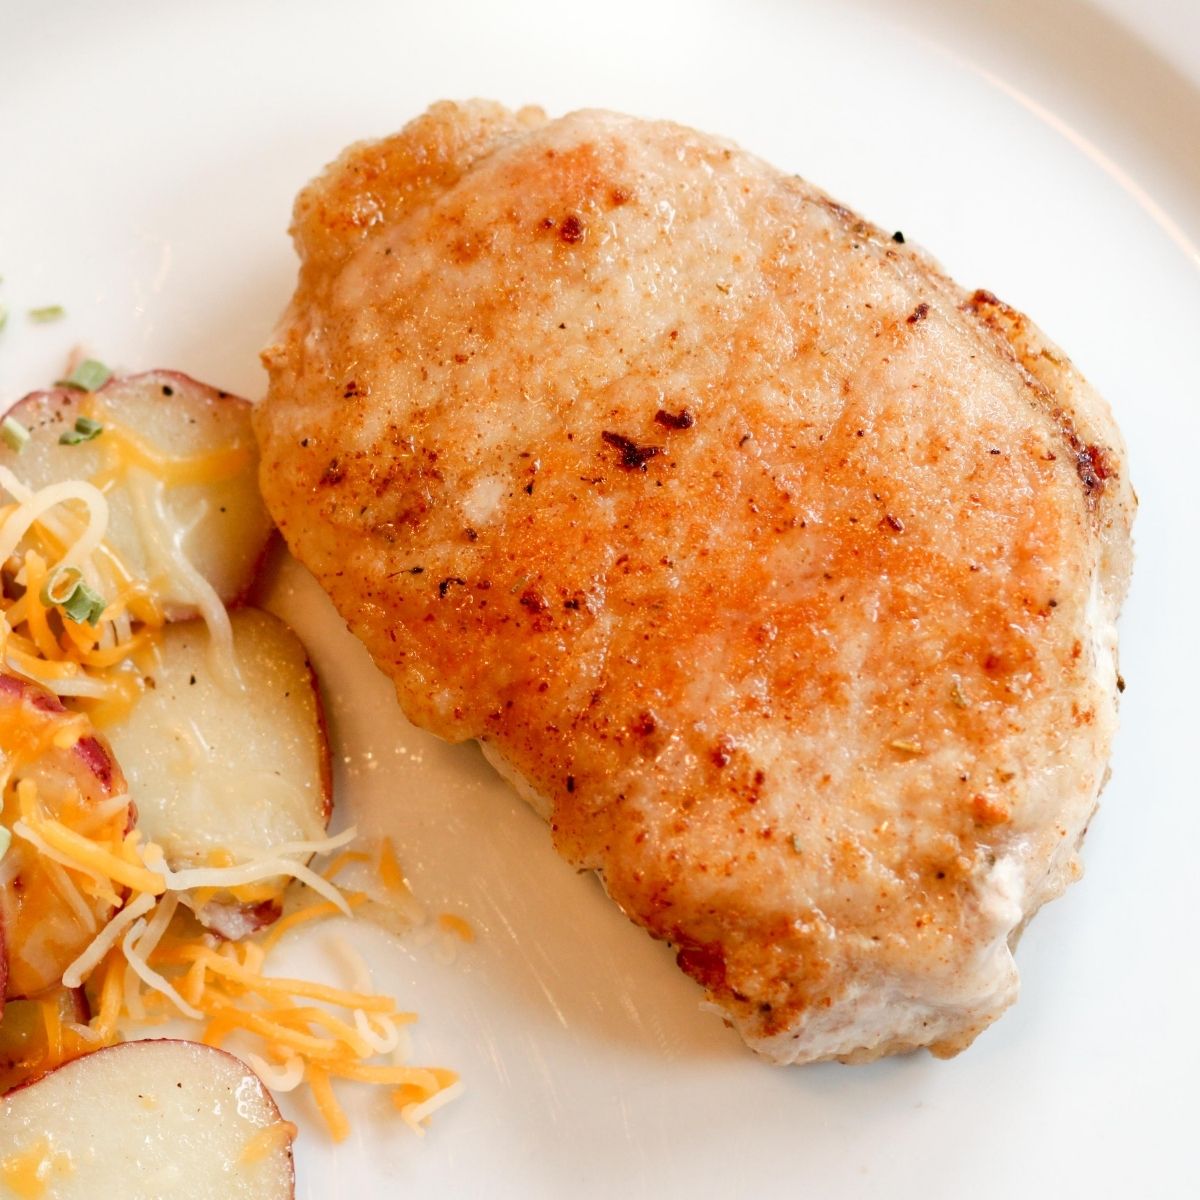 A cooked, pan-fried pork chop sits on a dinner plate next to potatoes.